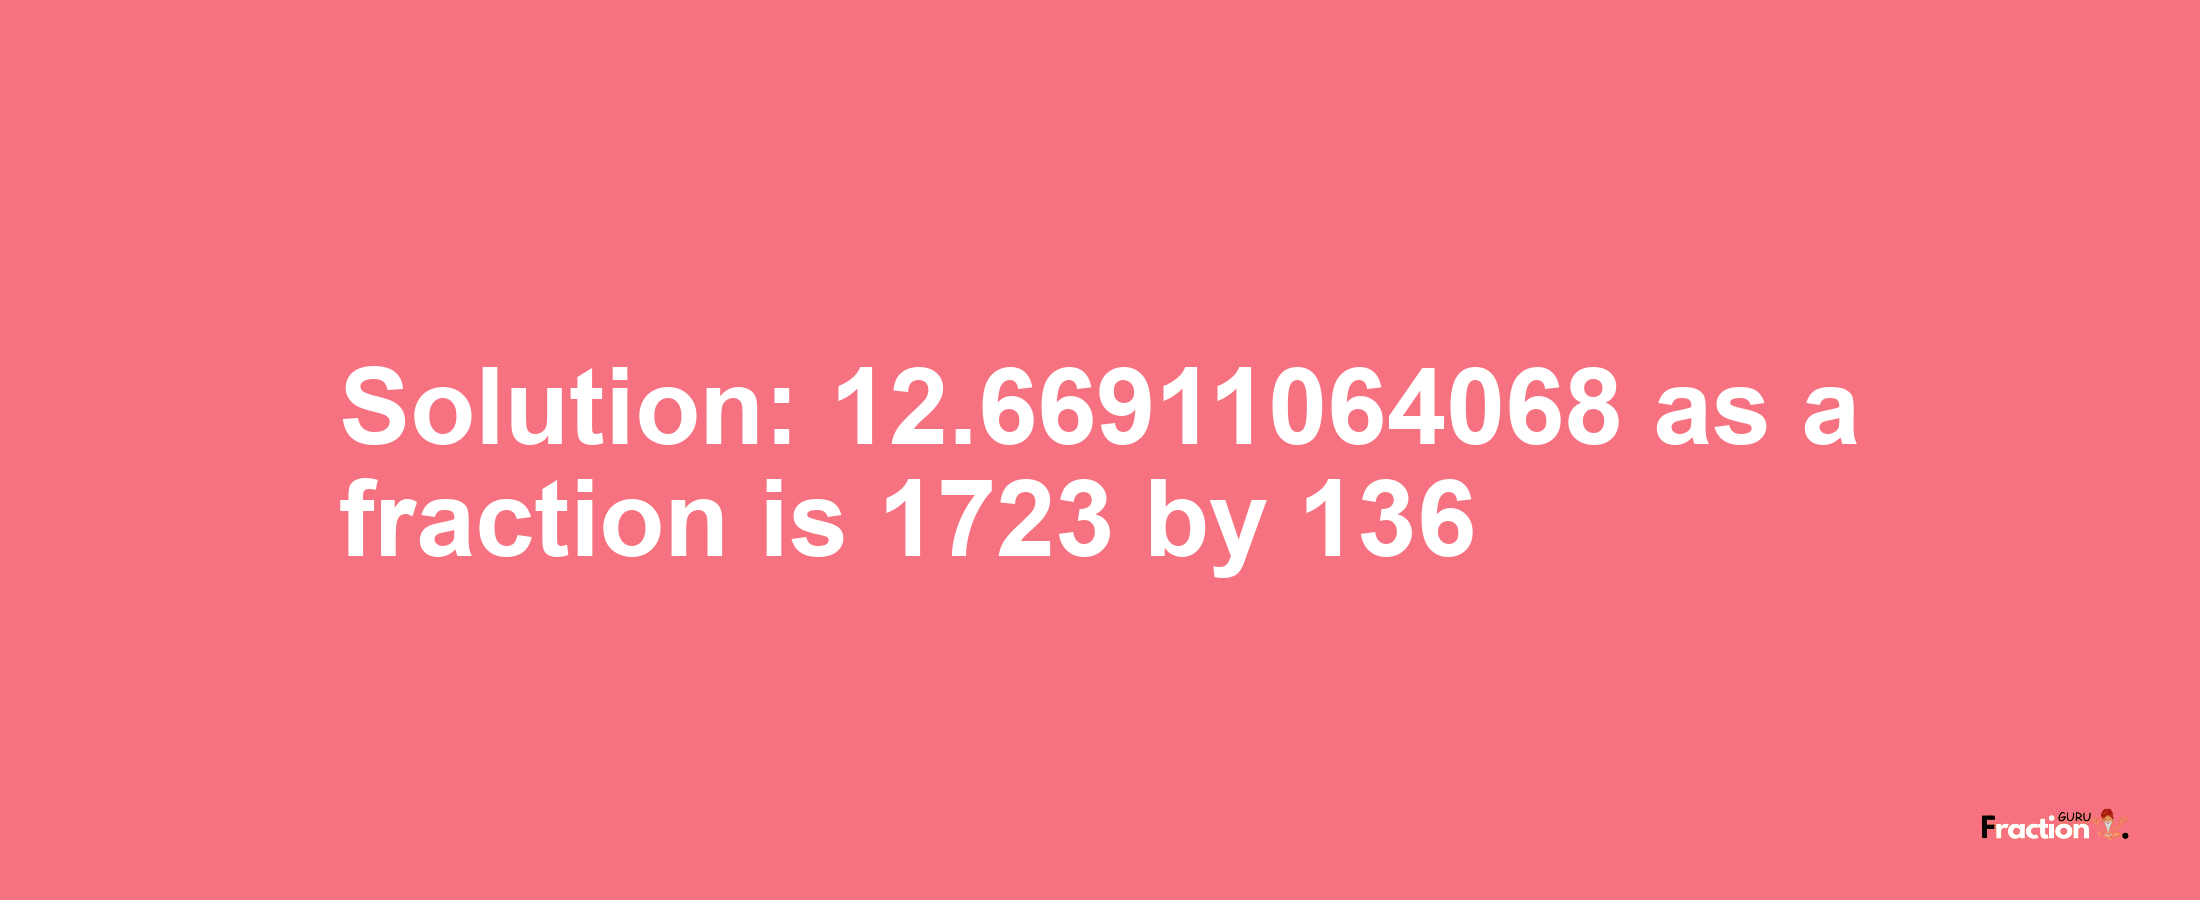 Solution:12.66911064068 as a fraction is 1723/136